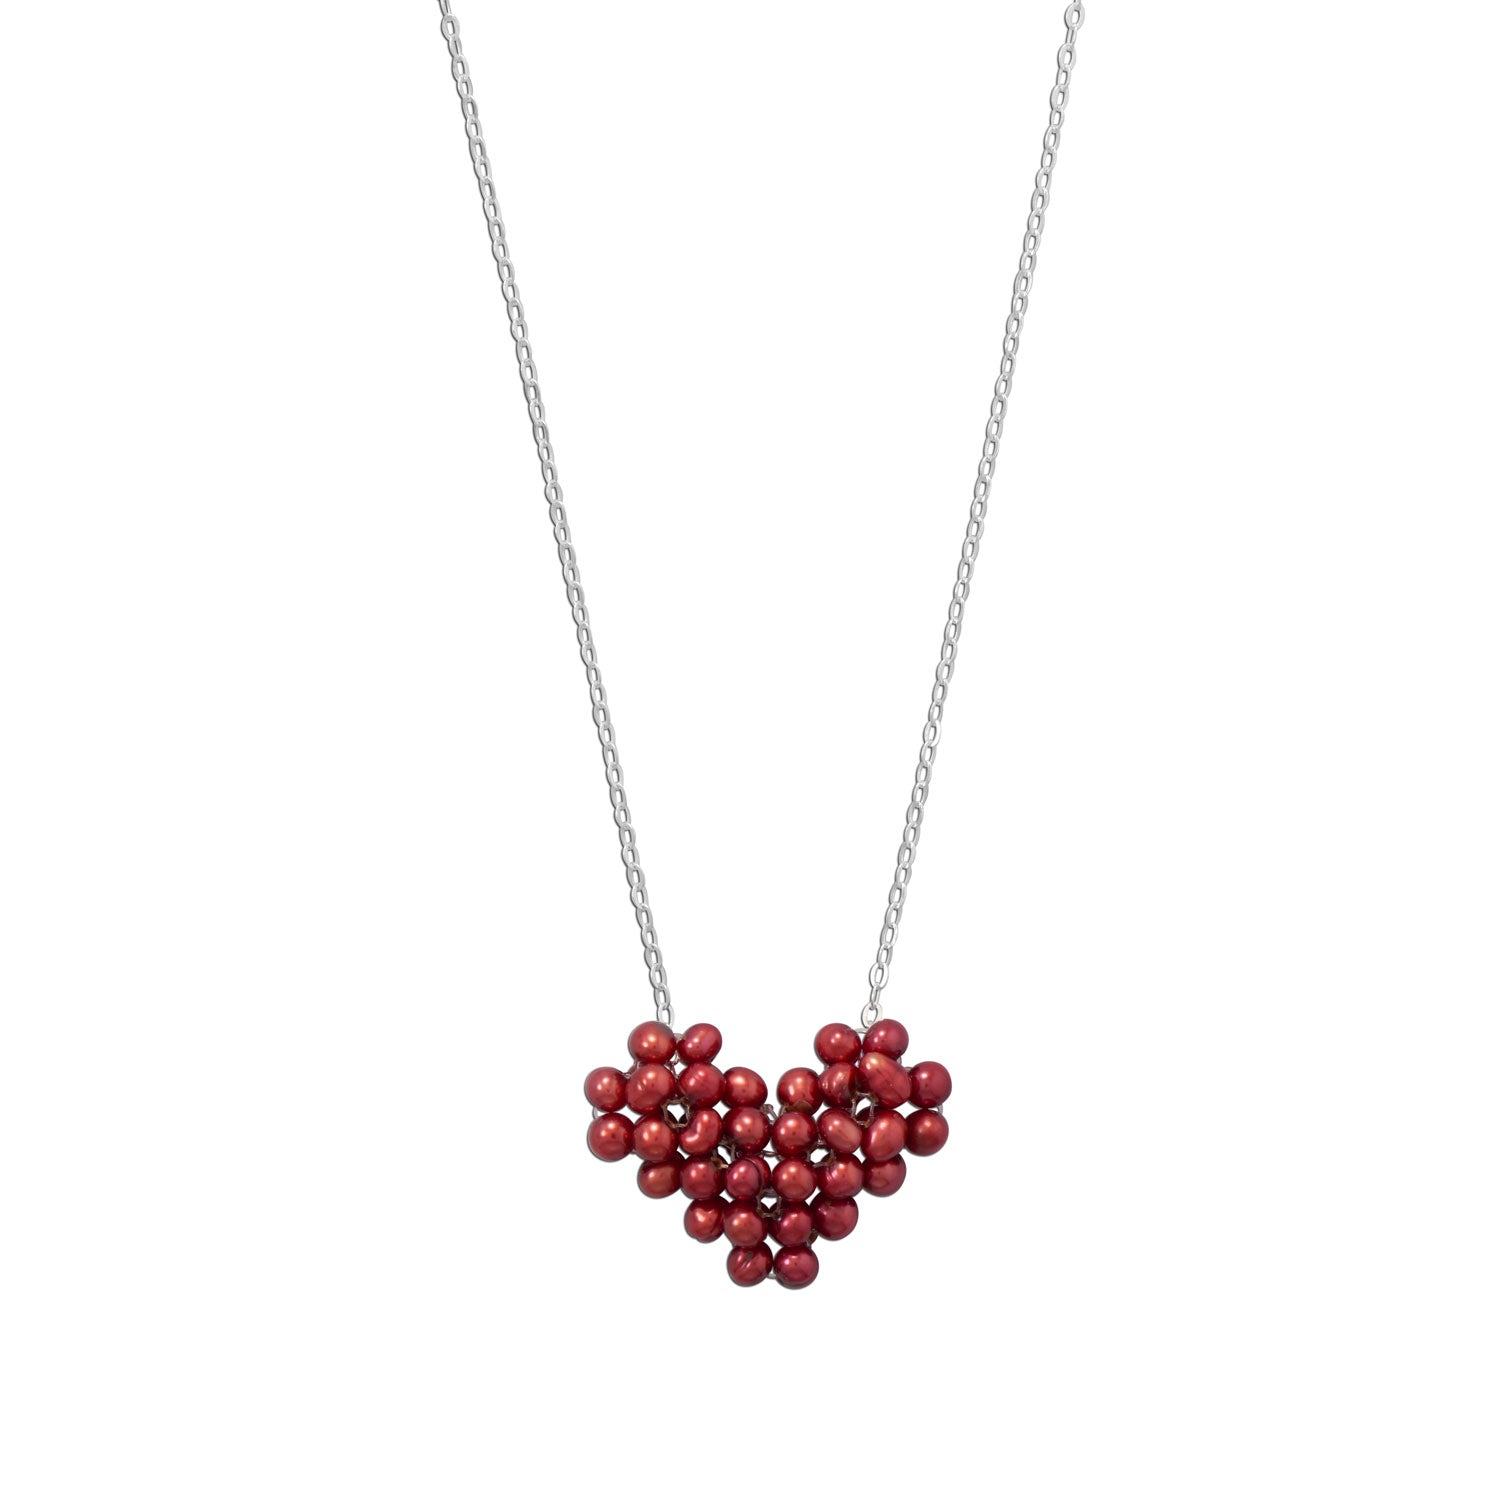 "Follow Your Heart!" Cultured Freshwater Pearl Heart Necklace